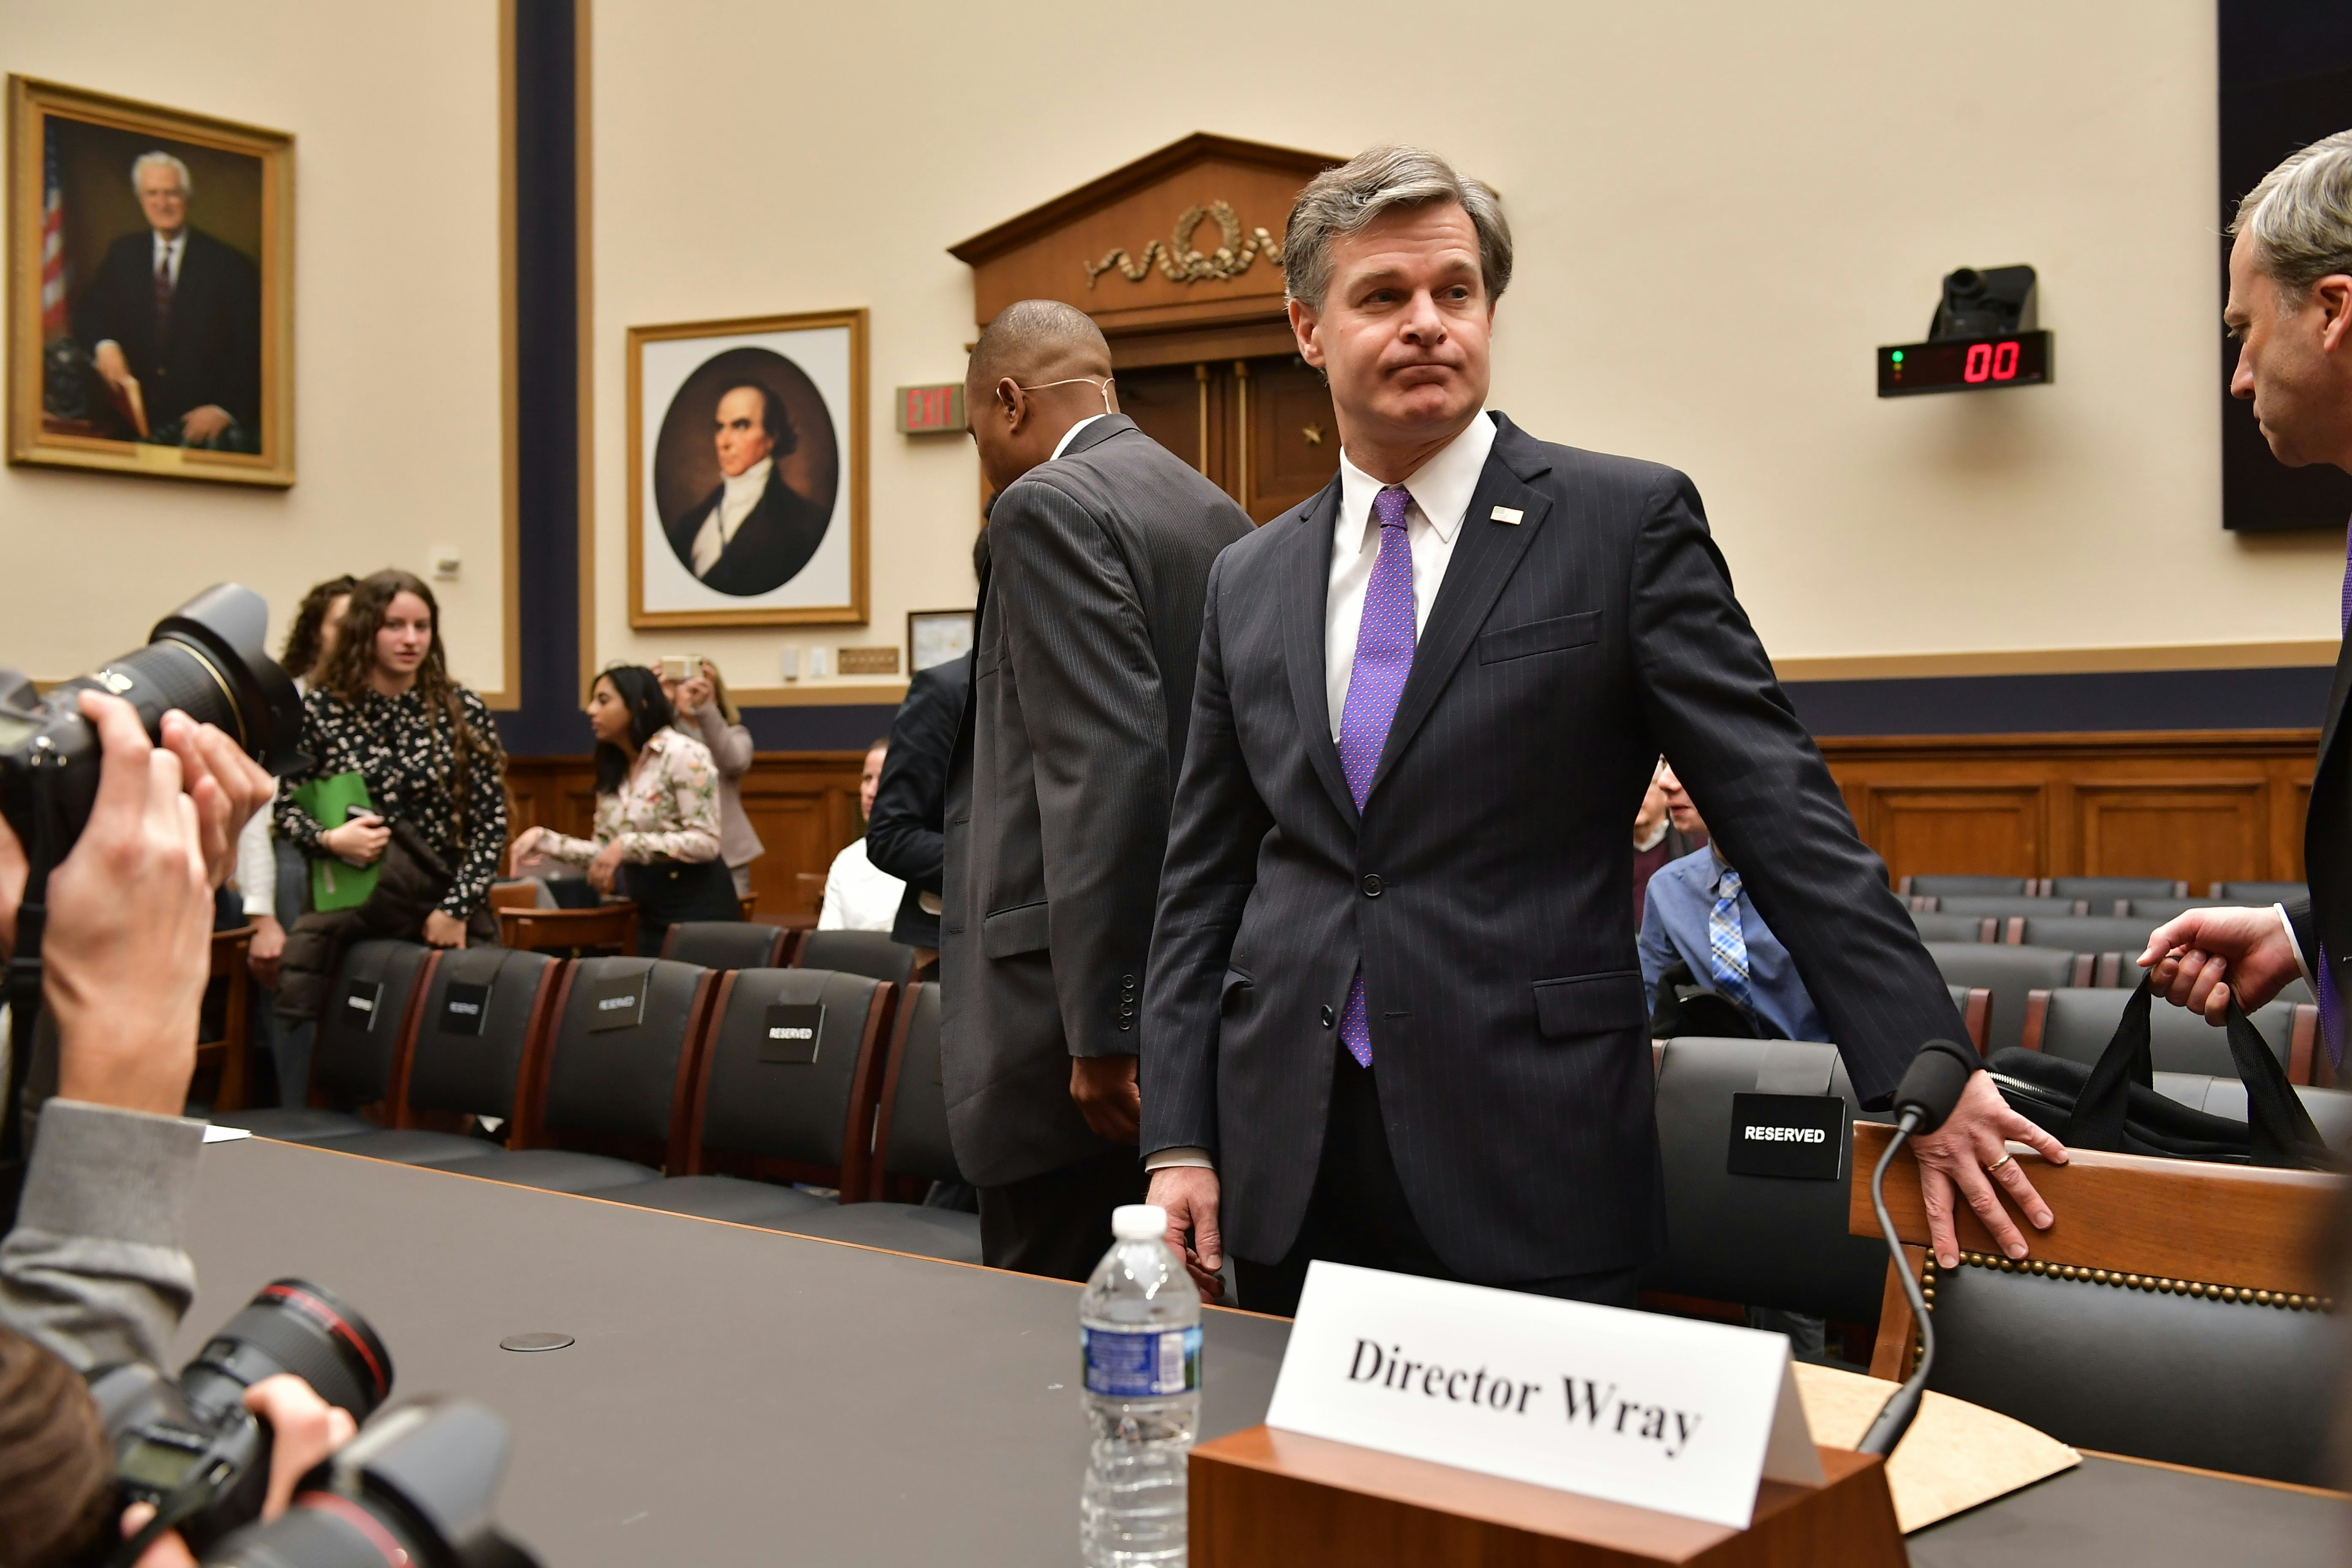 FBI Director Christopher Wray arrives to testify before the House Judiciary Committee  on oversight of the Federal Bureau of Investigation in the Rayburn House Office Building in Washington, DC on December 7, 2017.  / AFP PHOTO / MANDEL NGAN        (Photo credit should read MANDEL NGAN/AFP/Getty Images)